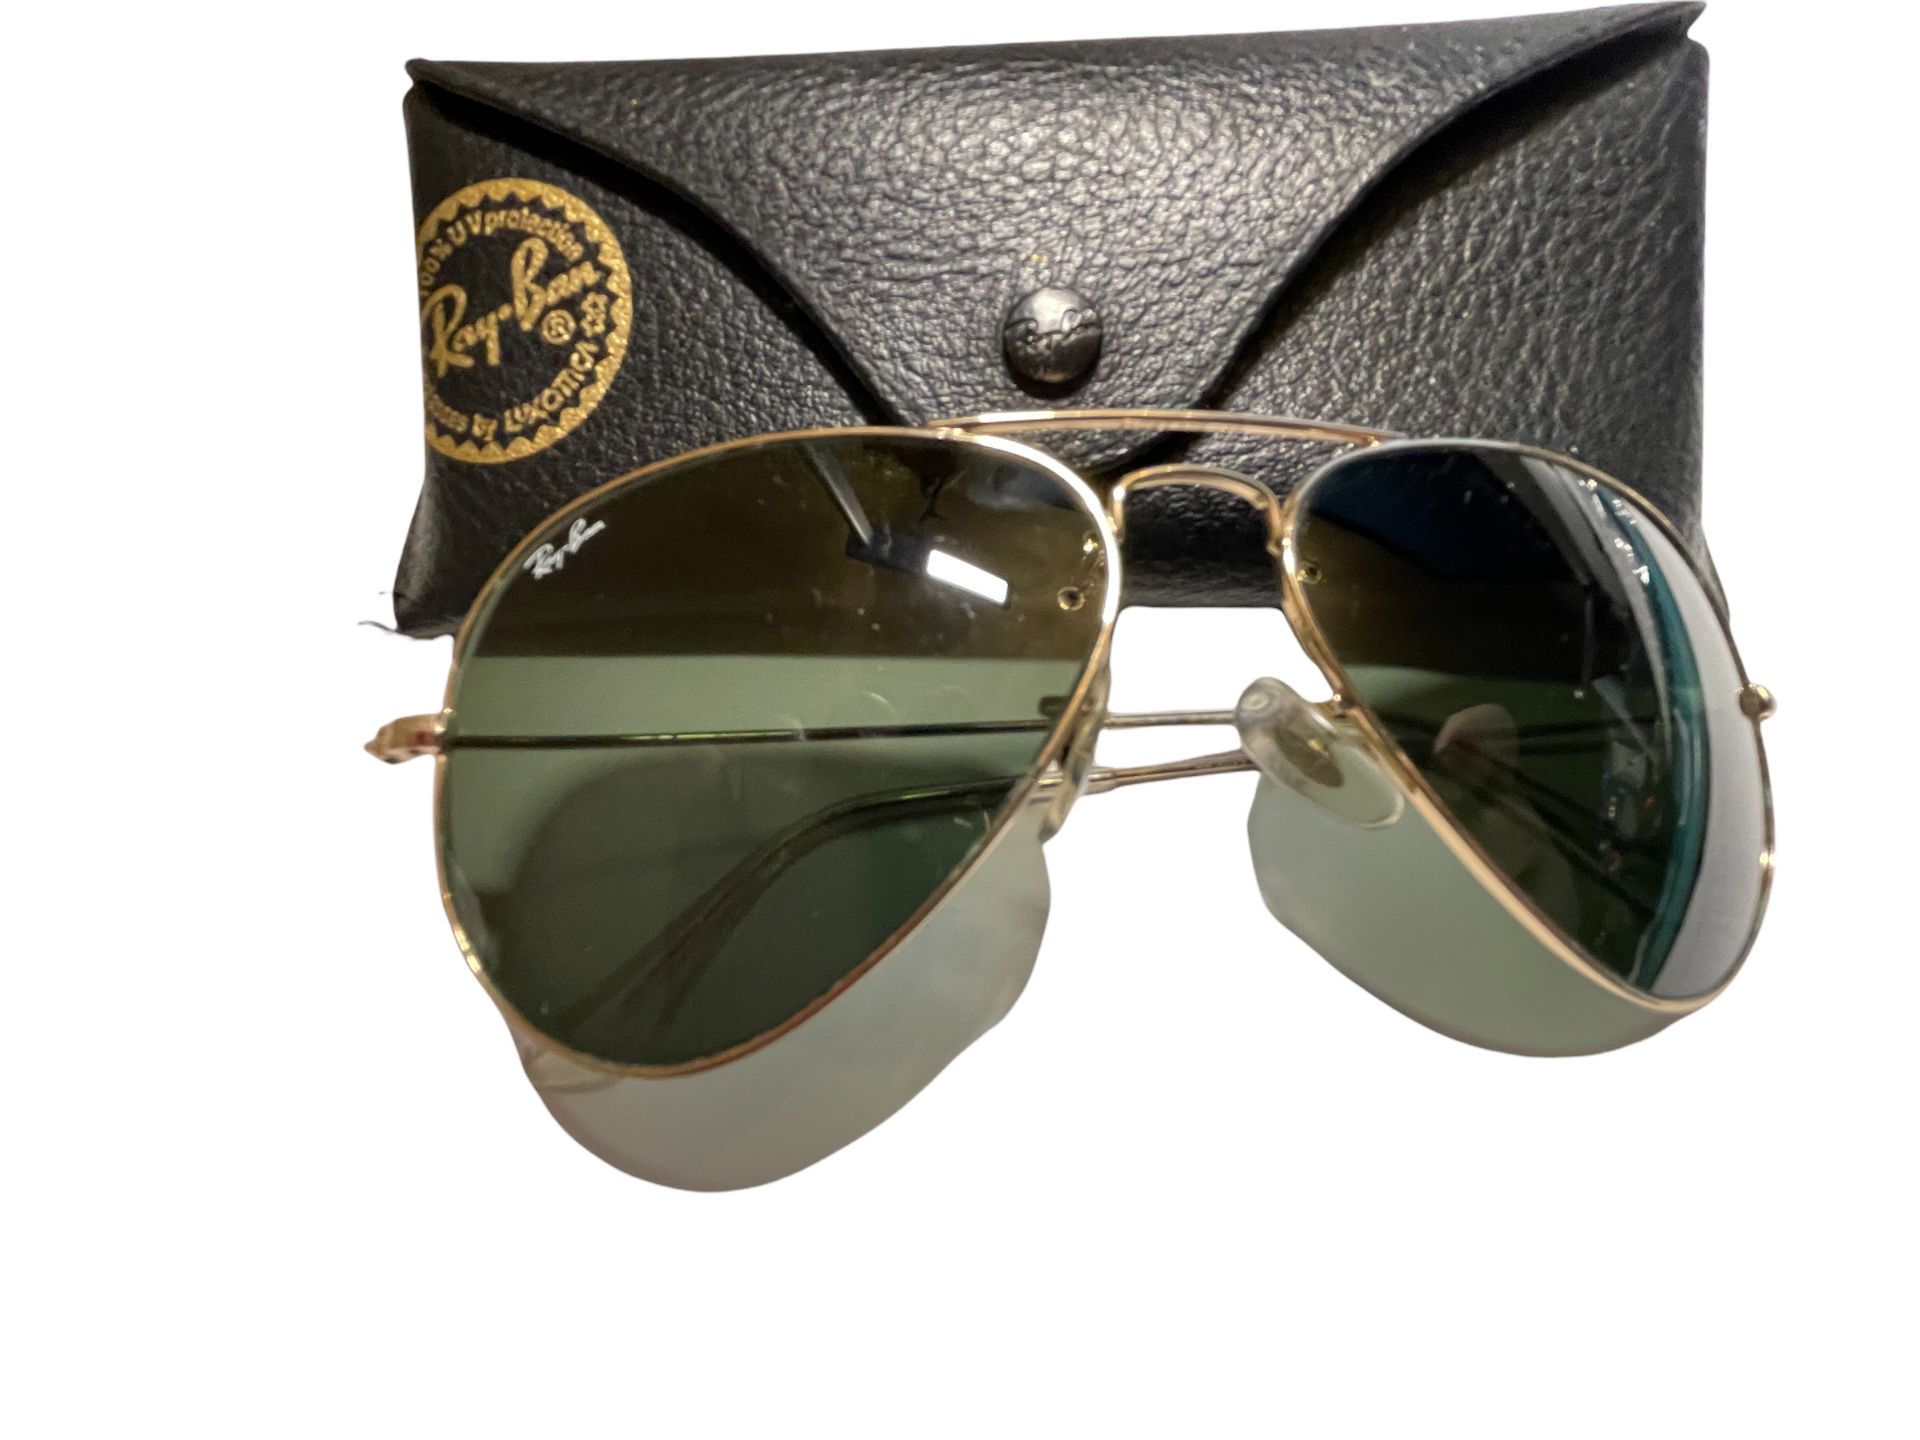 Lost Ray Ban Aviator Sunglasses with case on our private jet charter. - Image 5 of 6